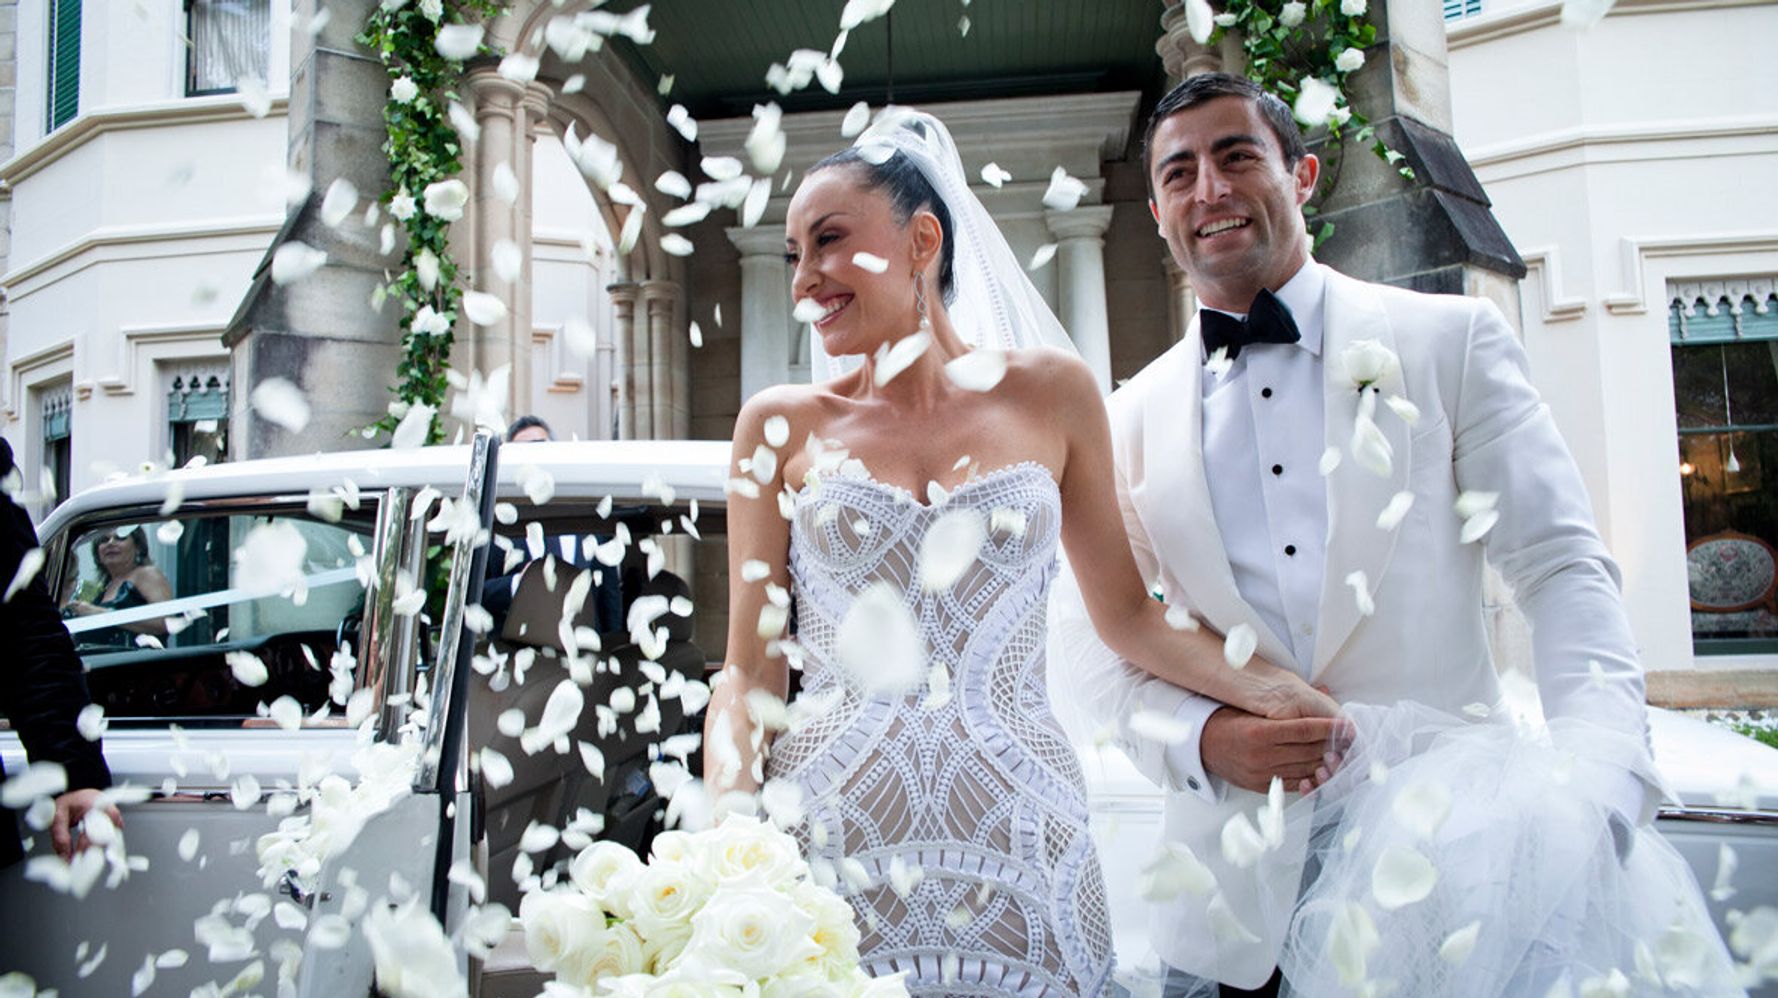 Take A Look At Australian Celebrity Wedding Dresses Through The ...